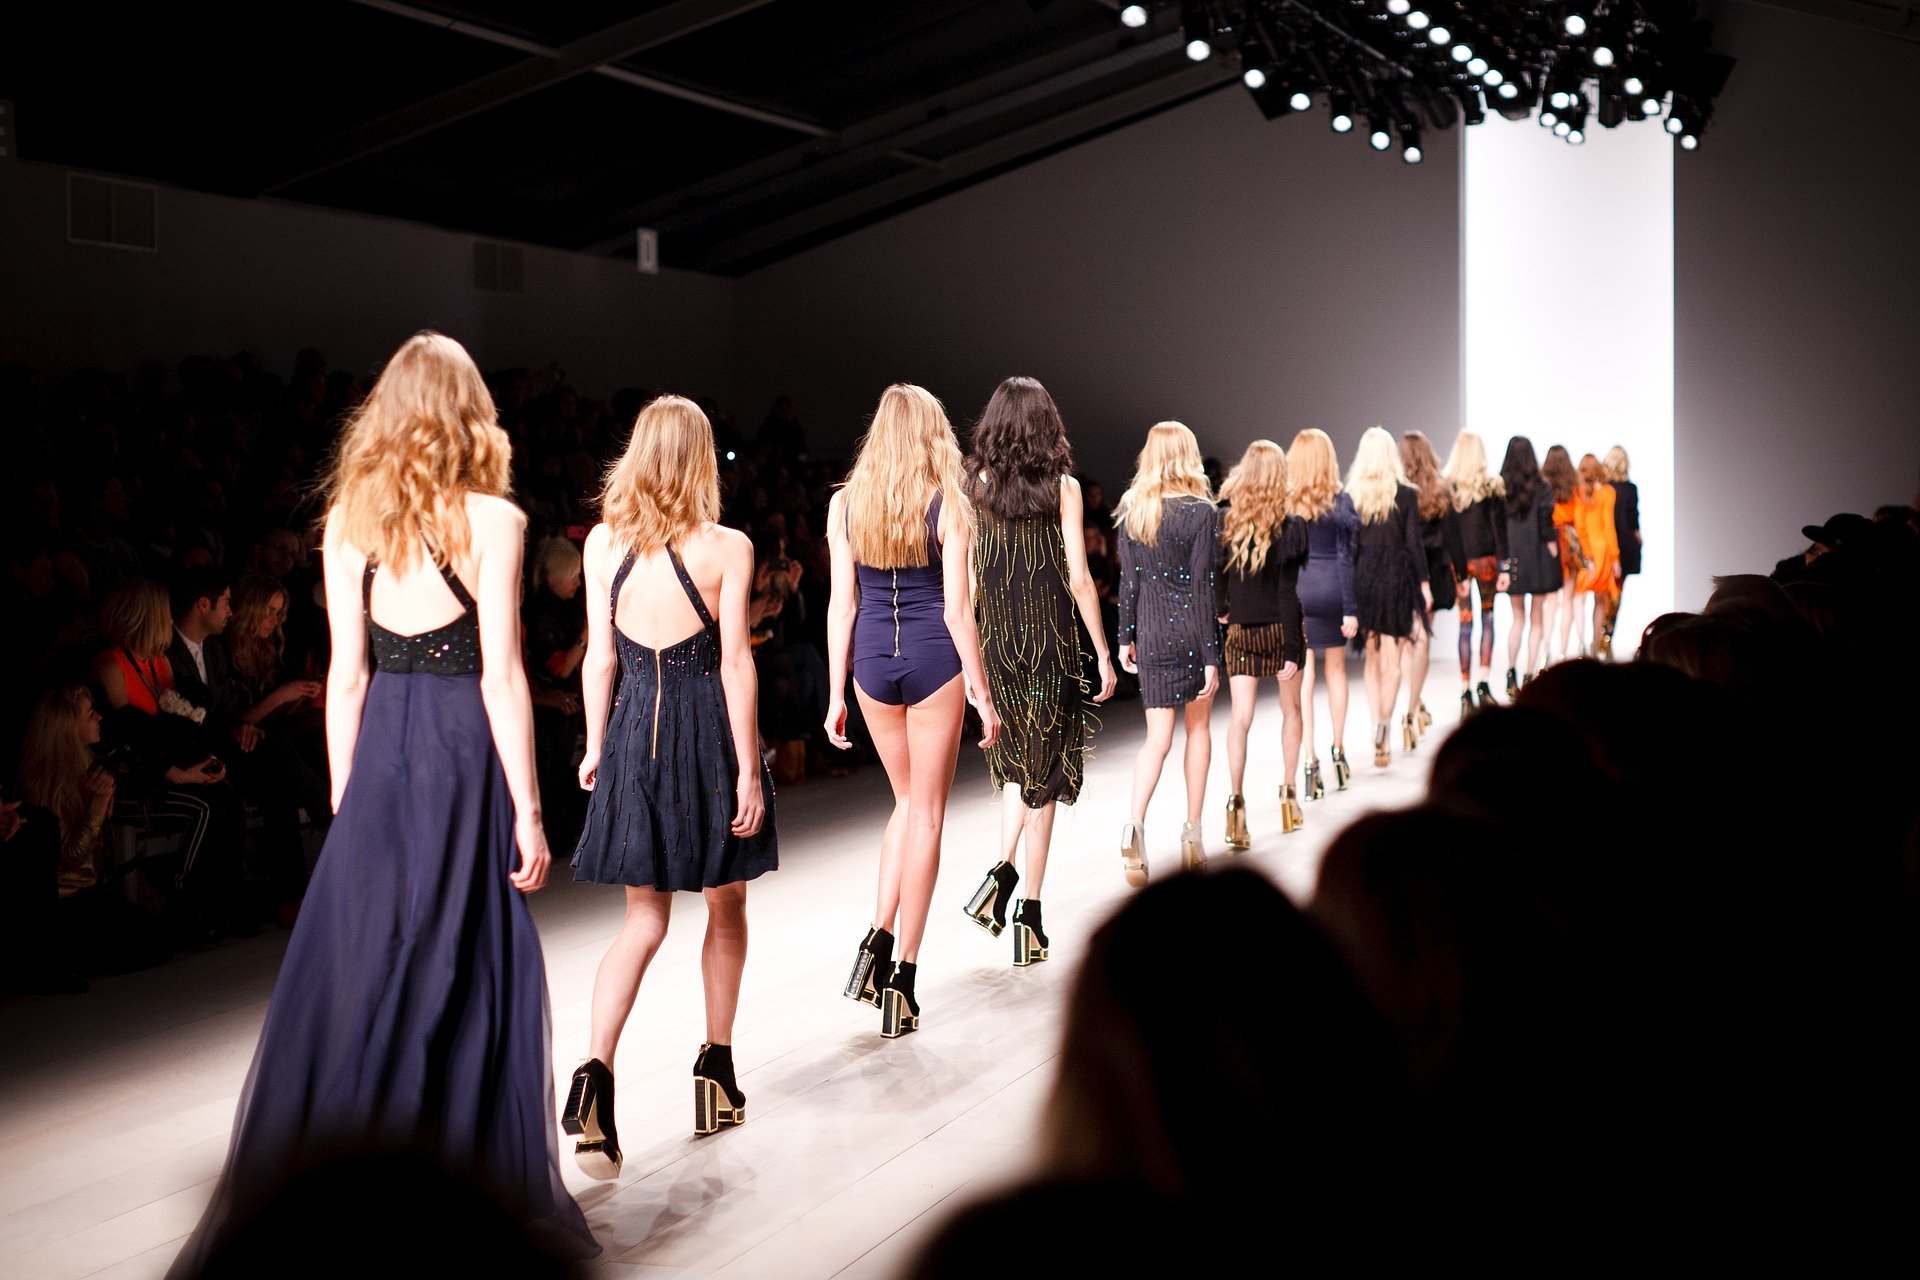 The transformation of the fashion industry